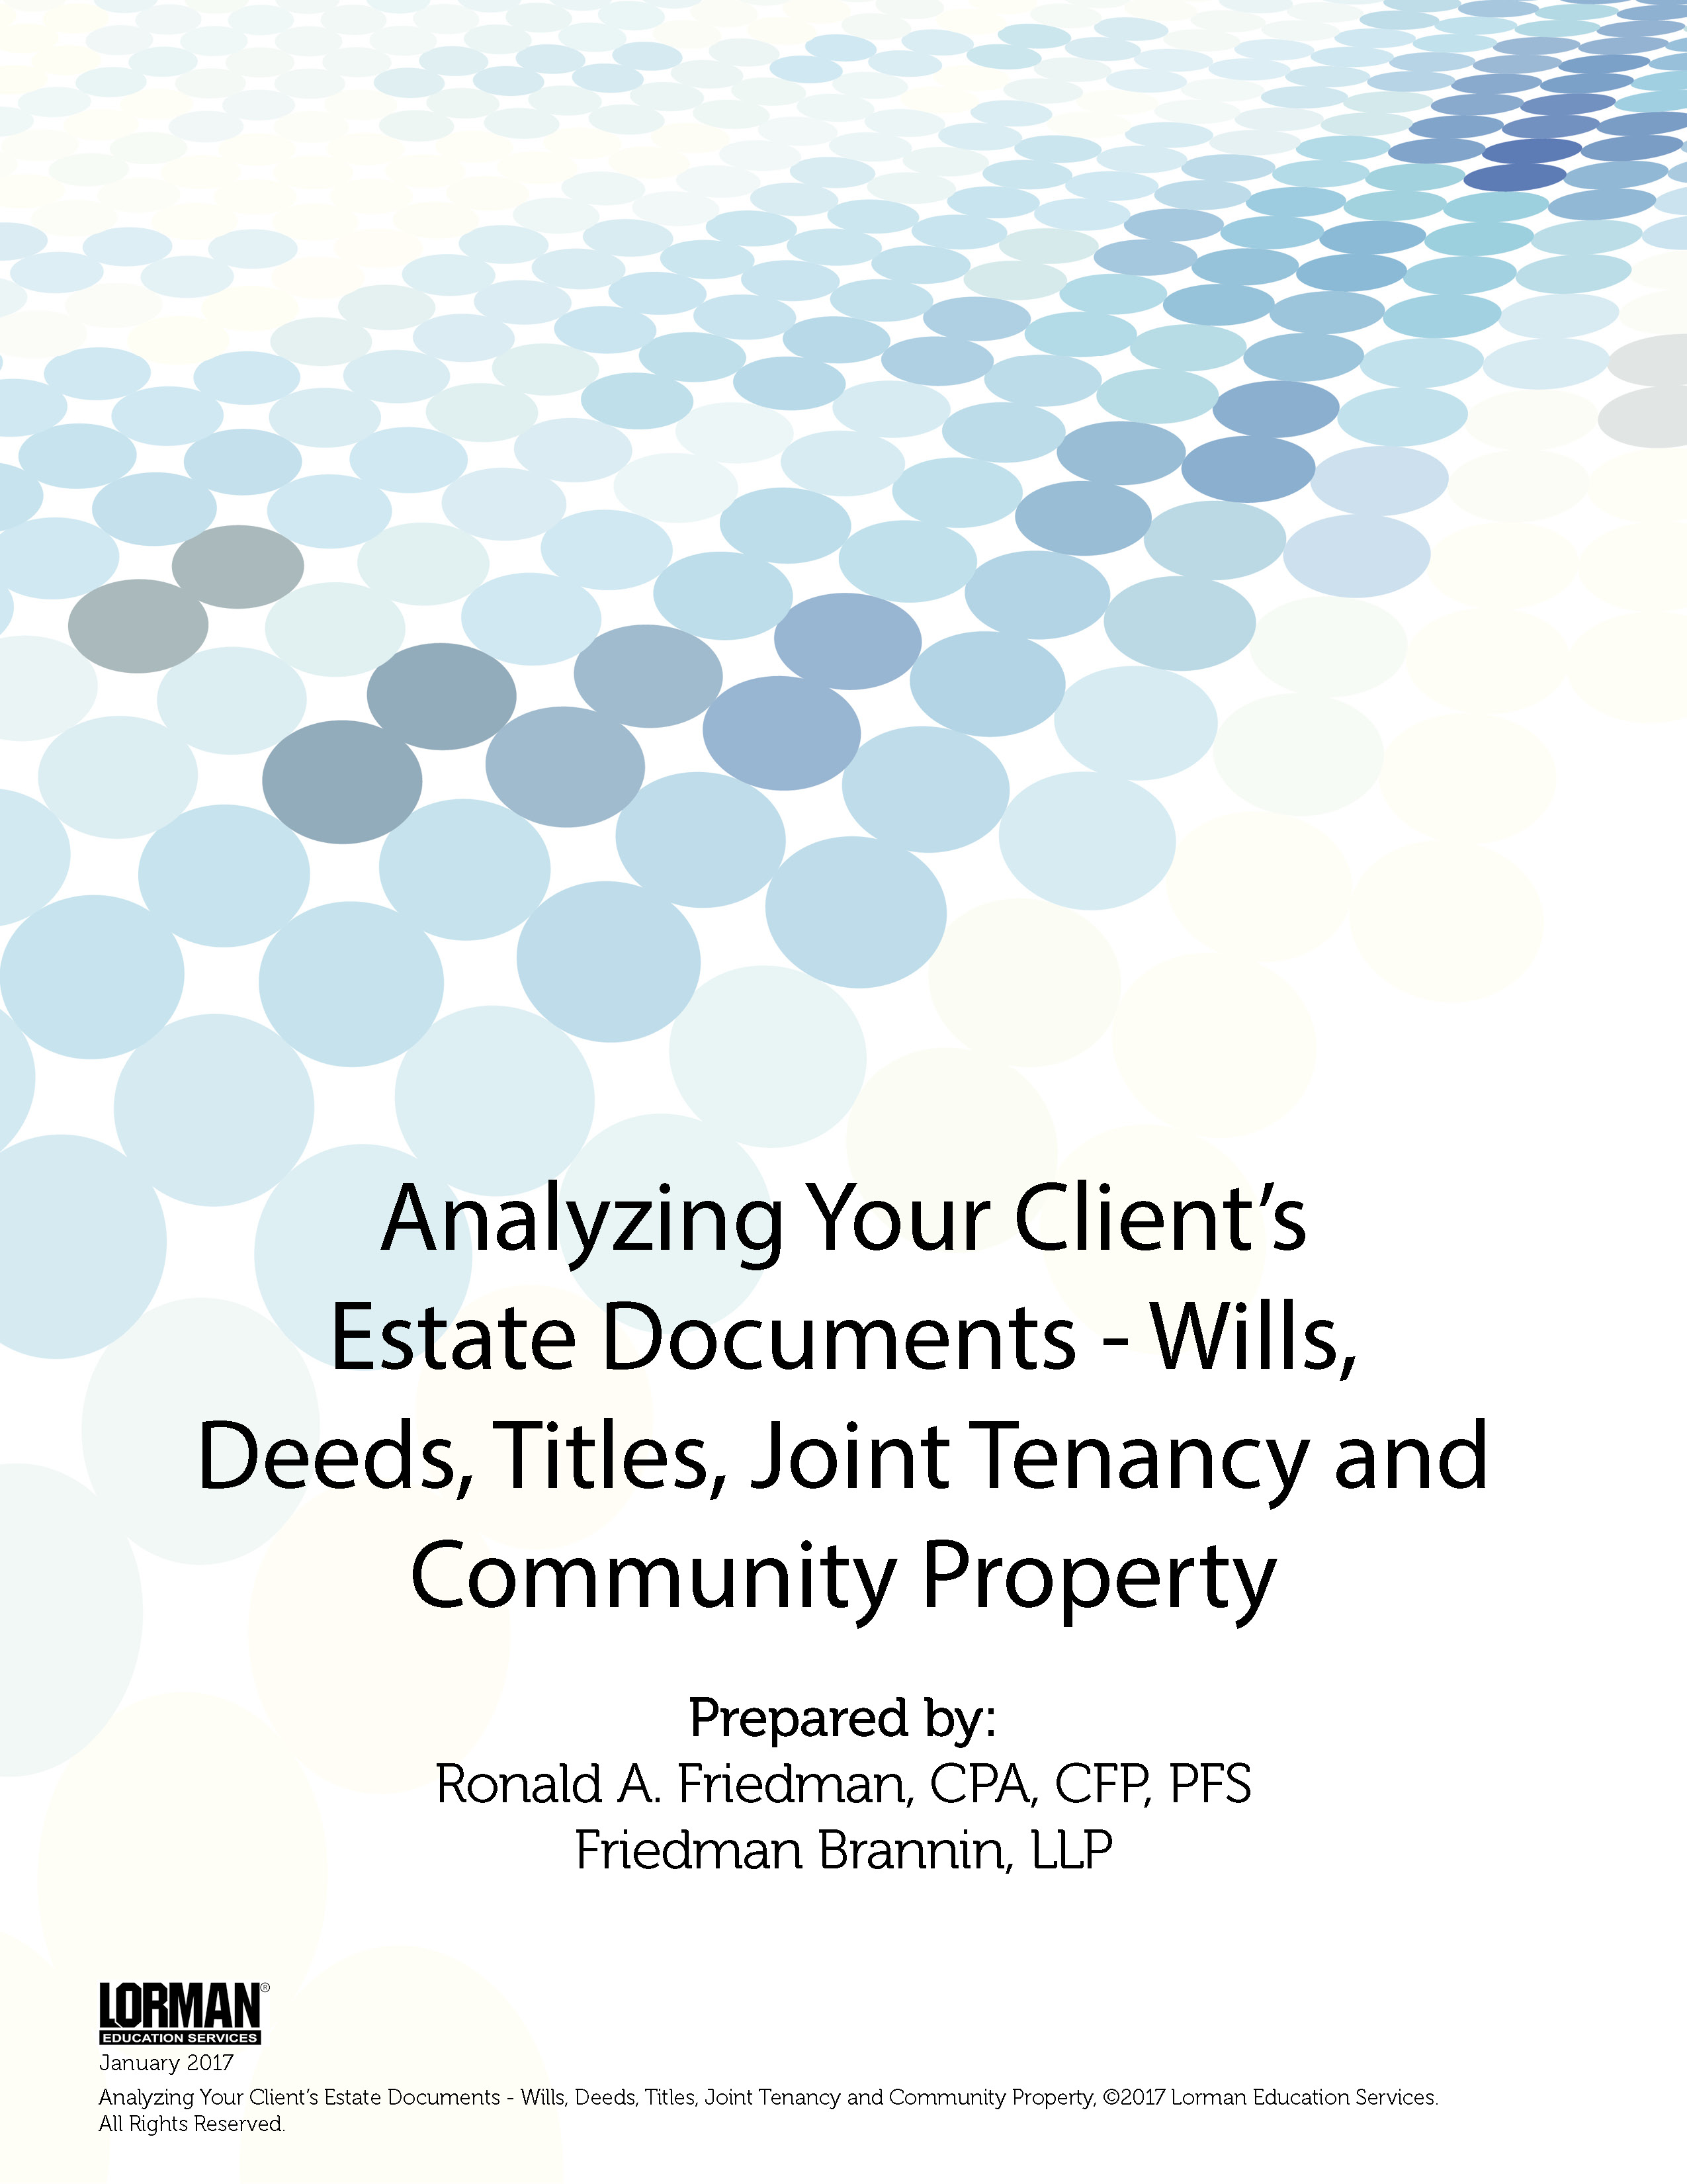 Analyzing Your Client's Estate Documents - Wills, Deeds, Joint Tenancy and Community Property